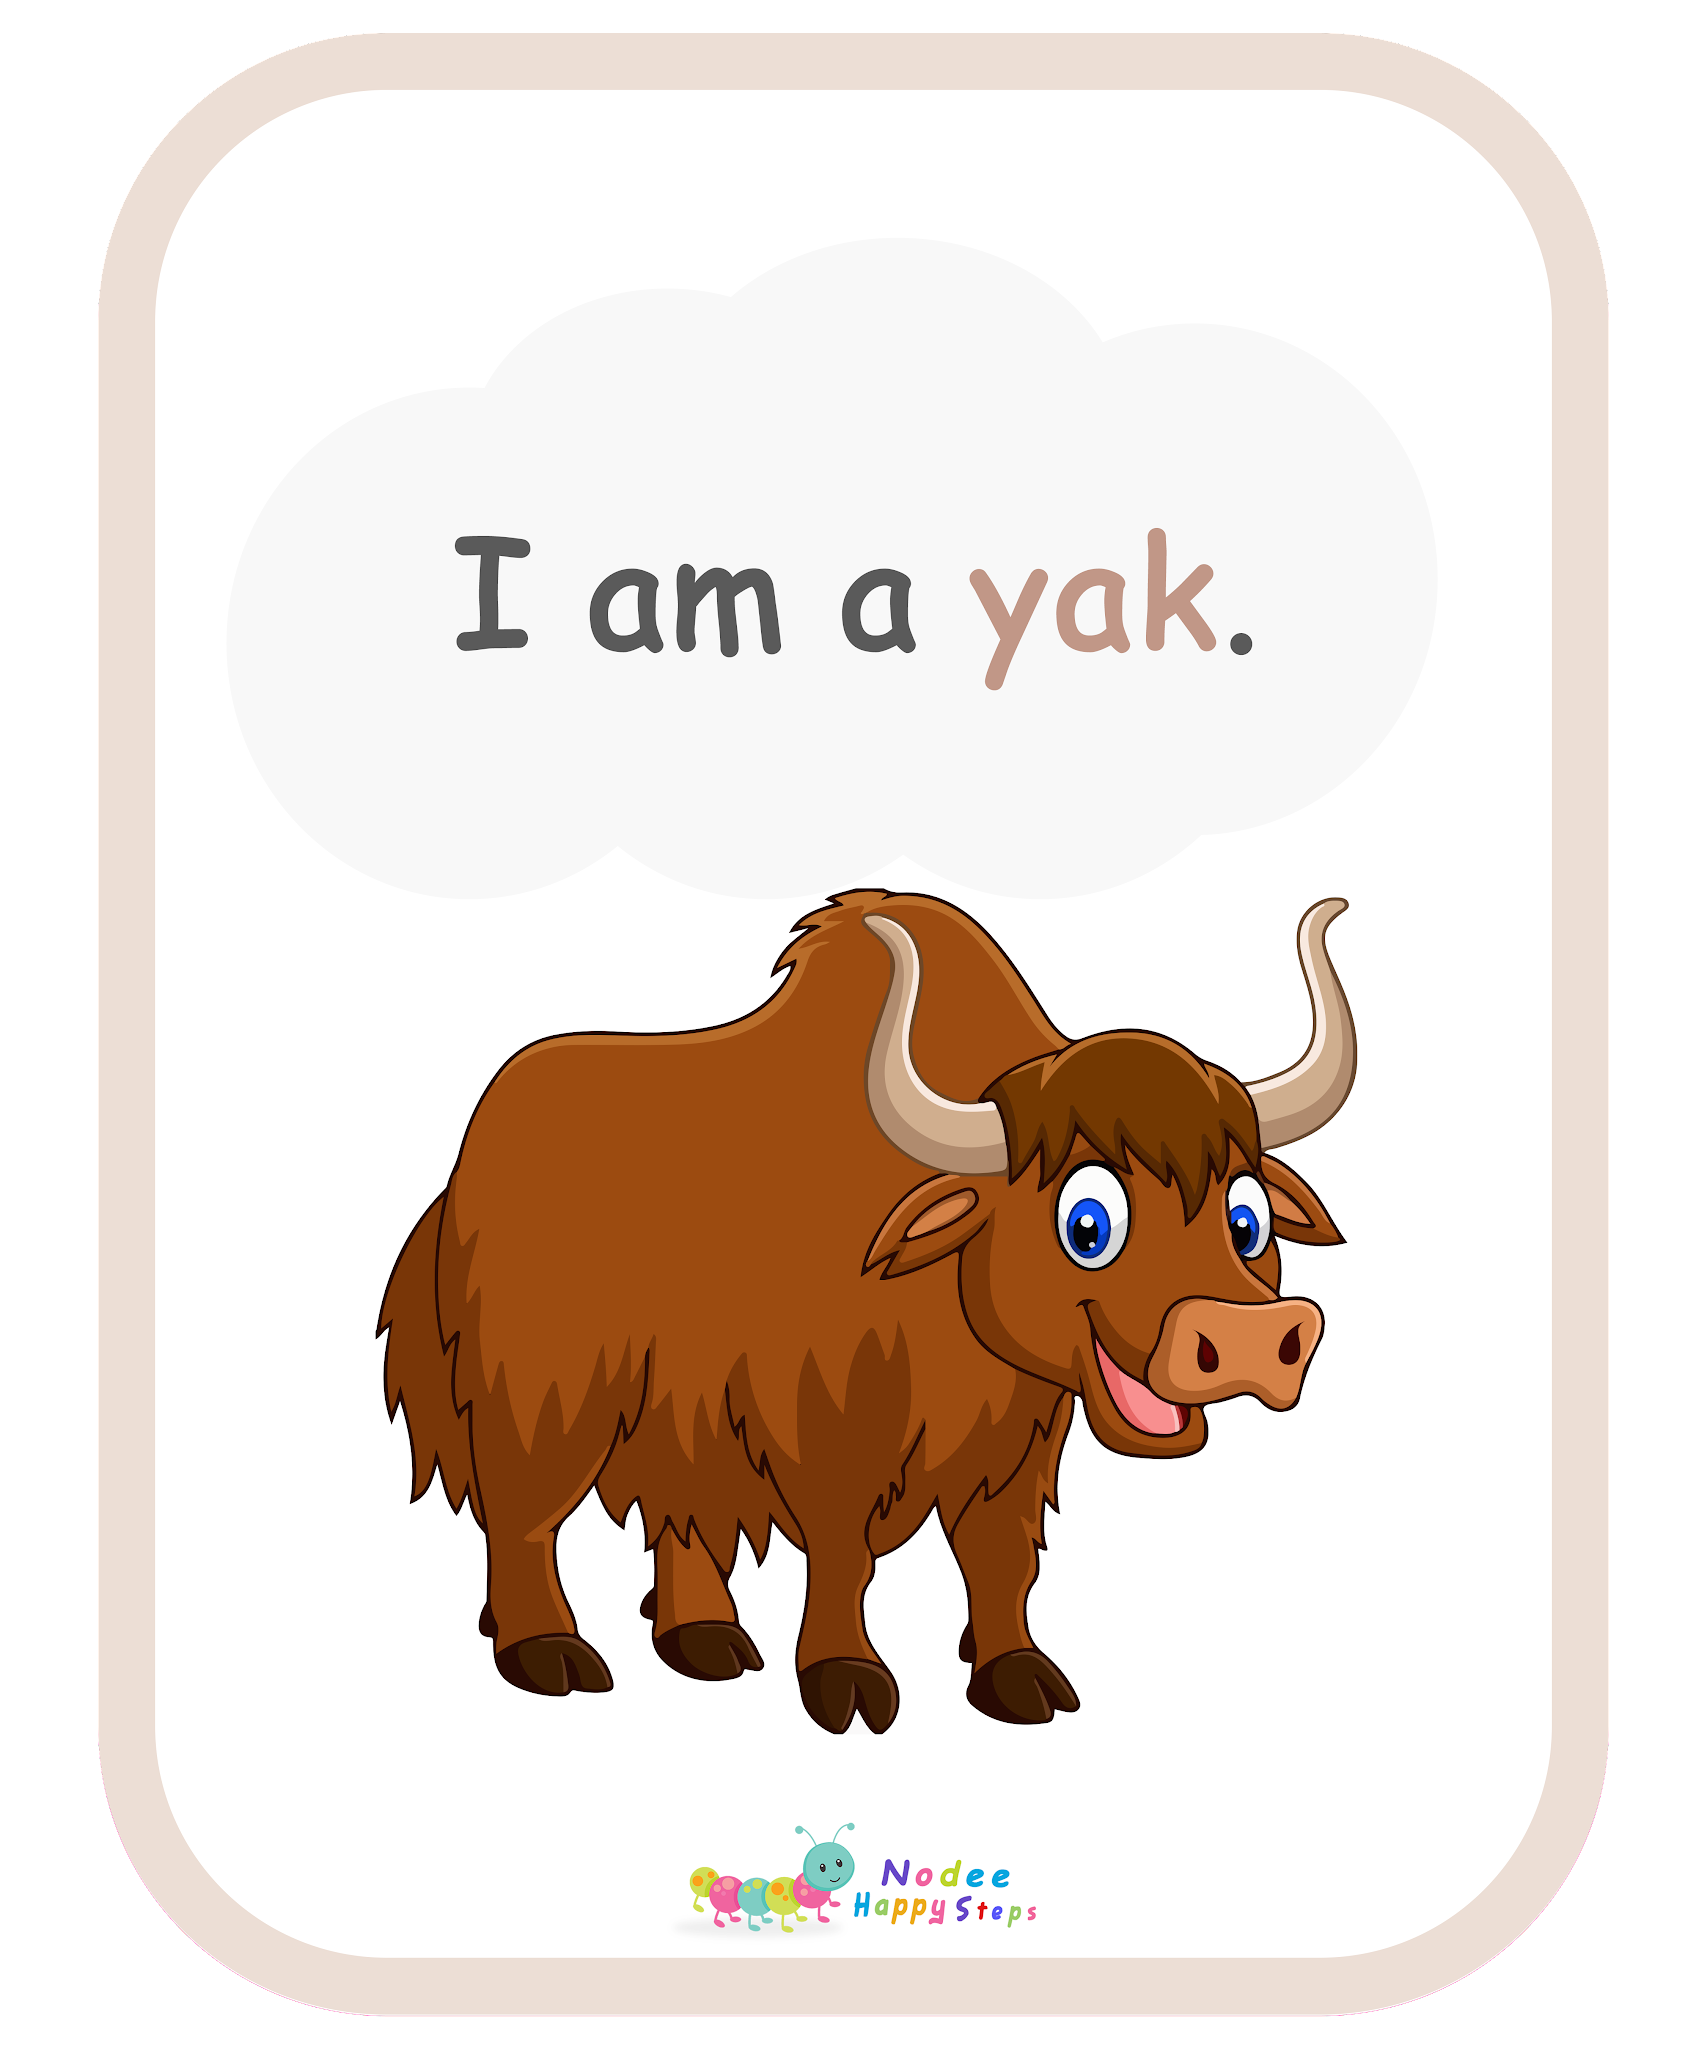 Guessing for Kids - Who am I? - I am a Yak